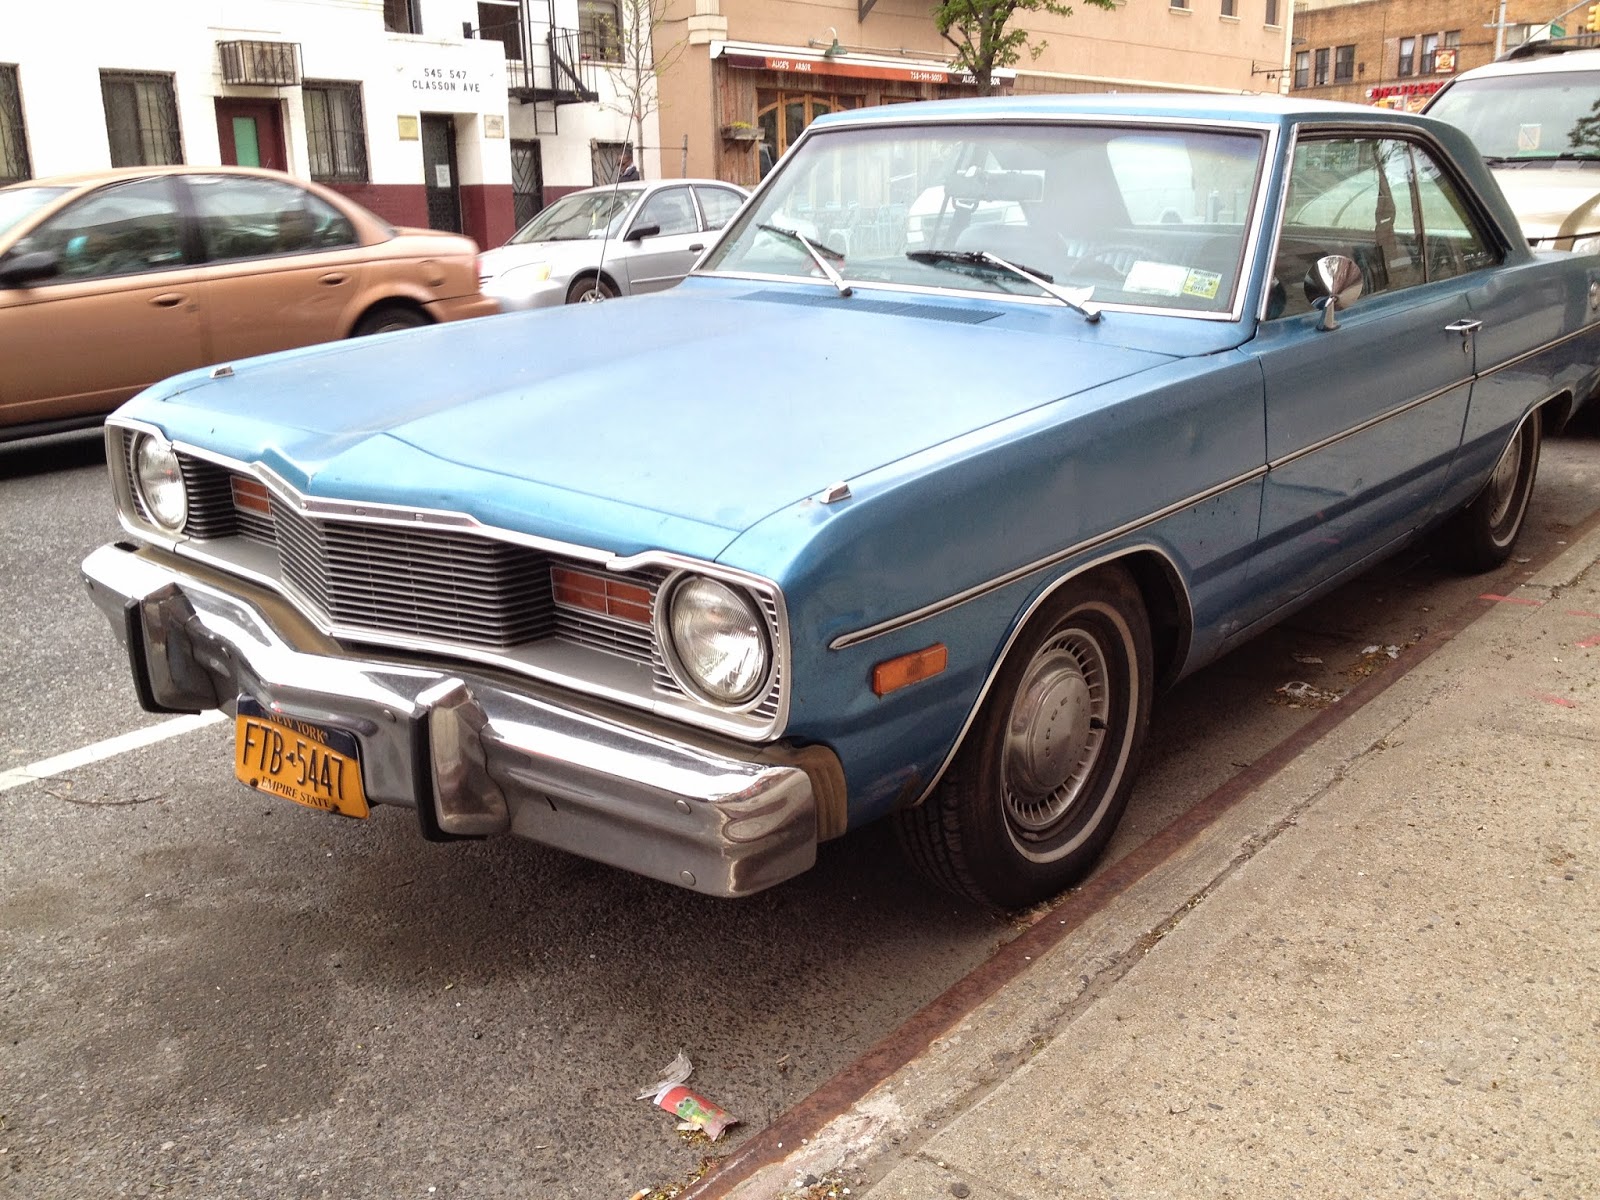 Nyc Hoopties Whips Rides Buckets Junkers And Clunkers Twofer